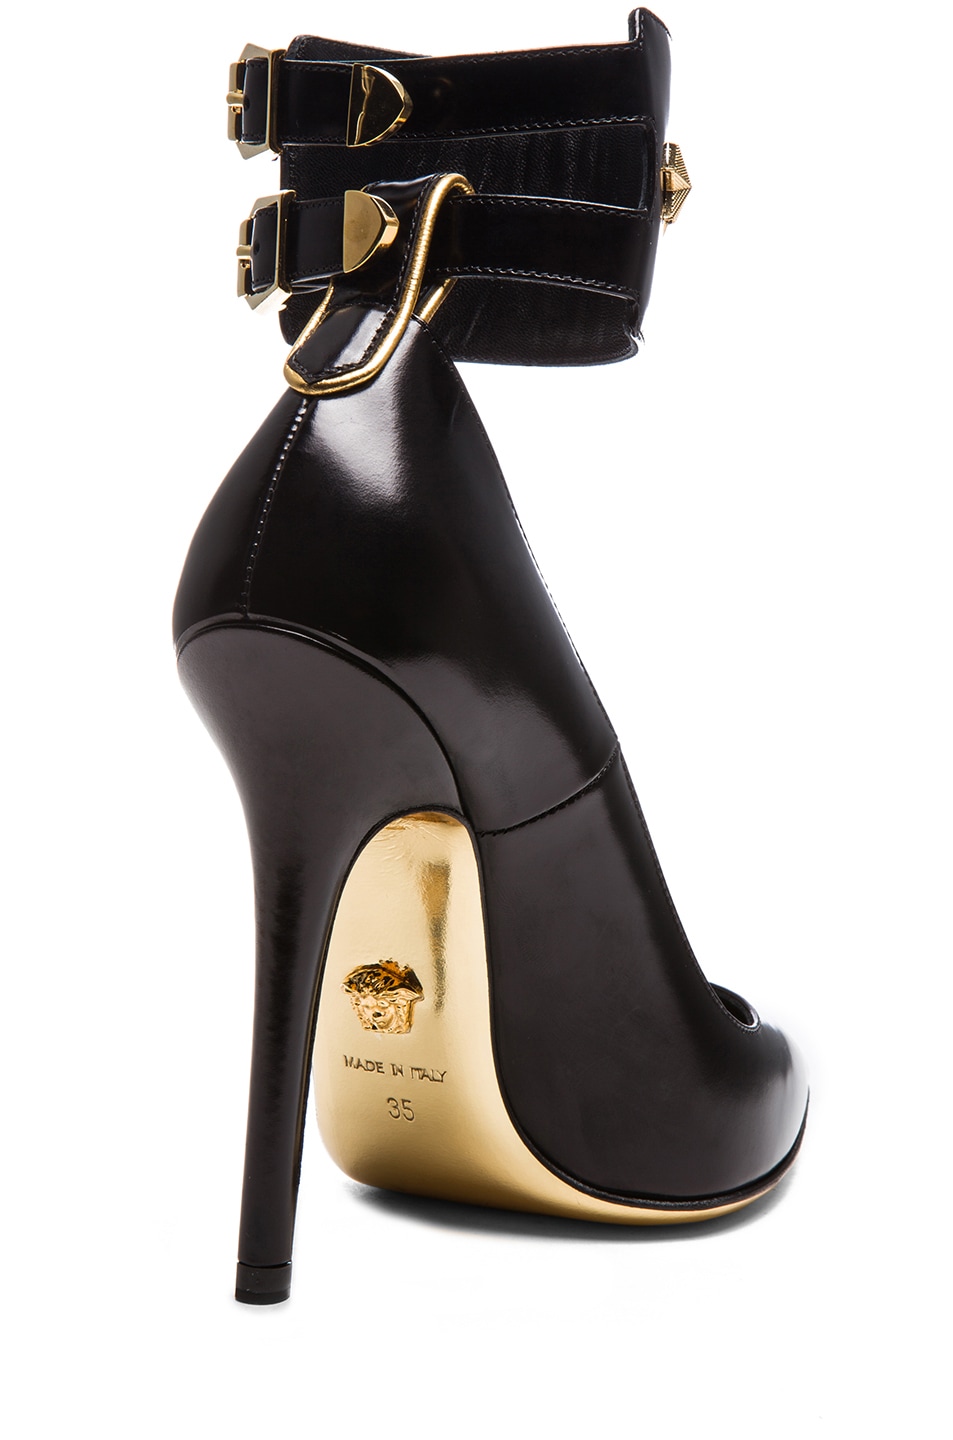 VERSACE Leather Ankle Strap Pointy Toe Pump in Black & Gold | FWRD